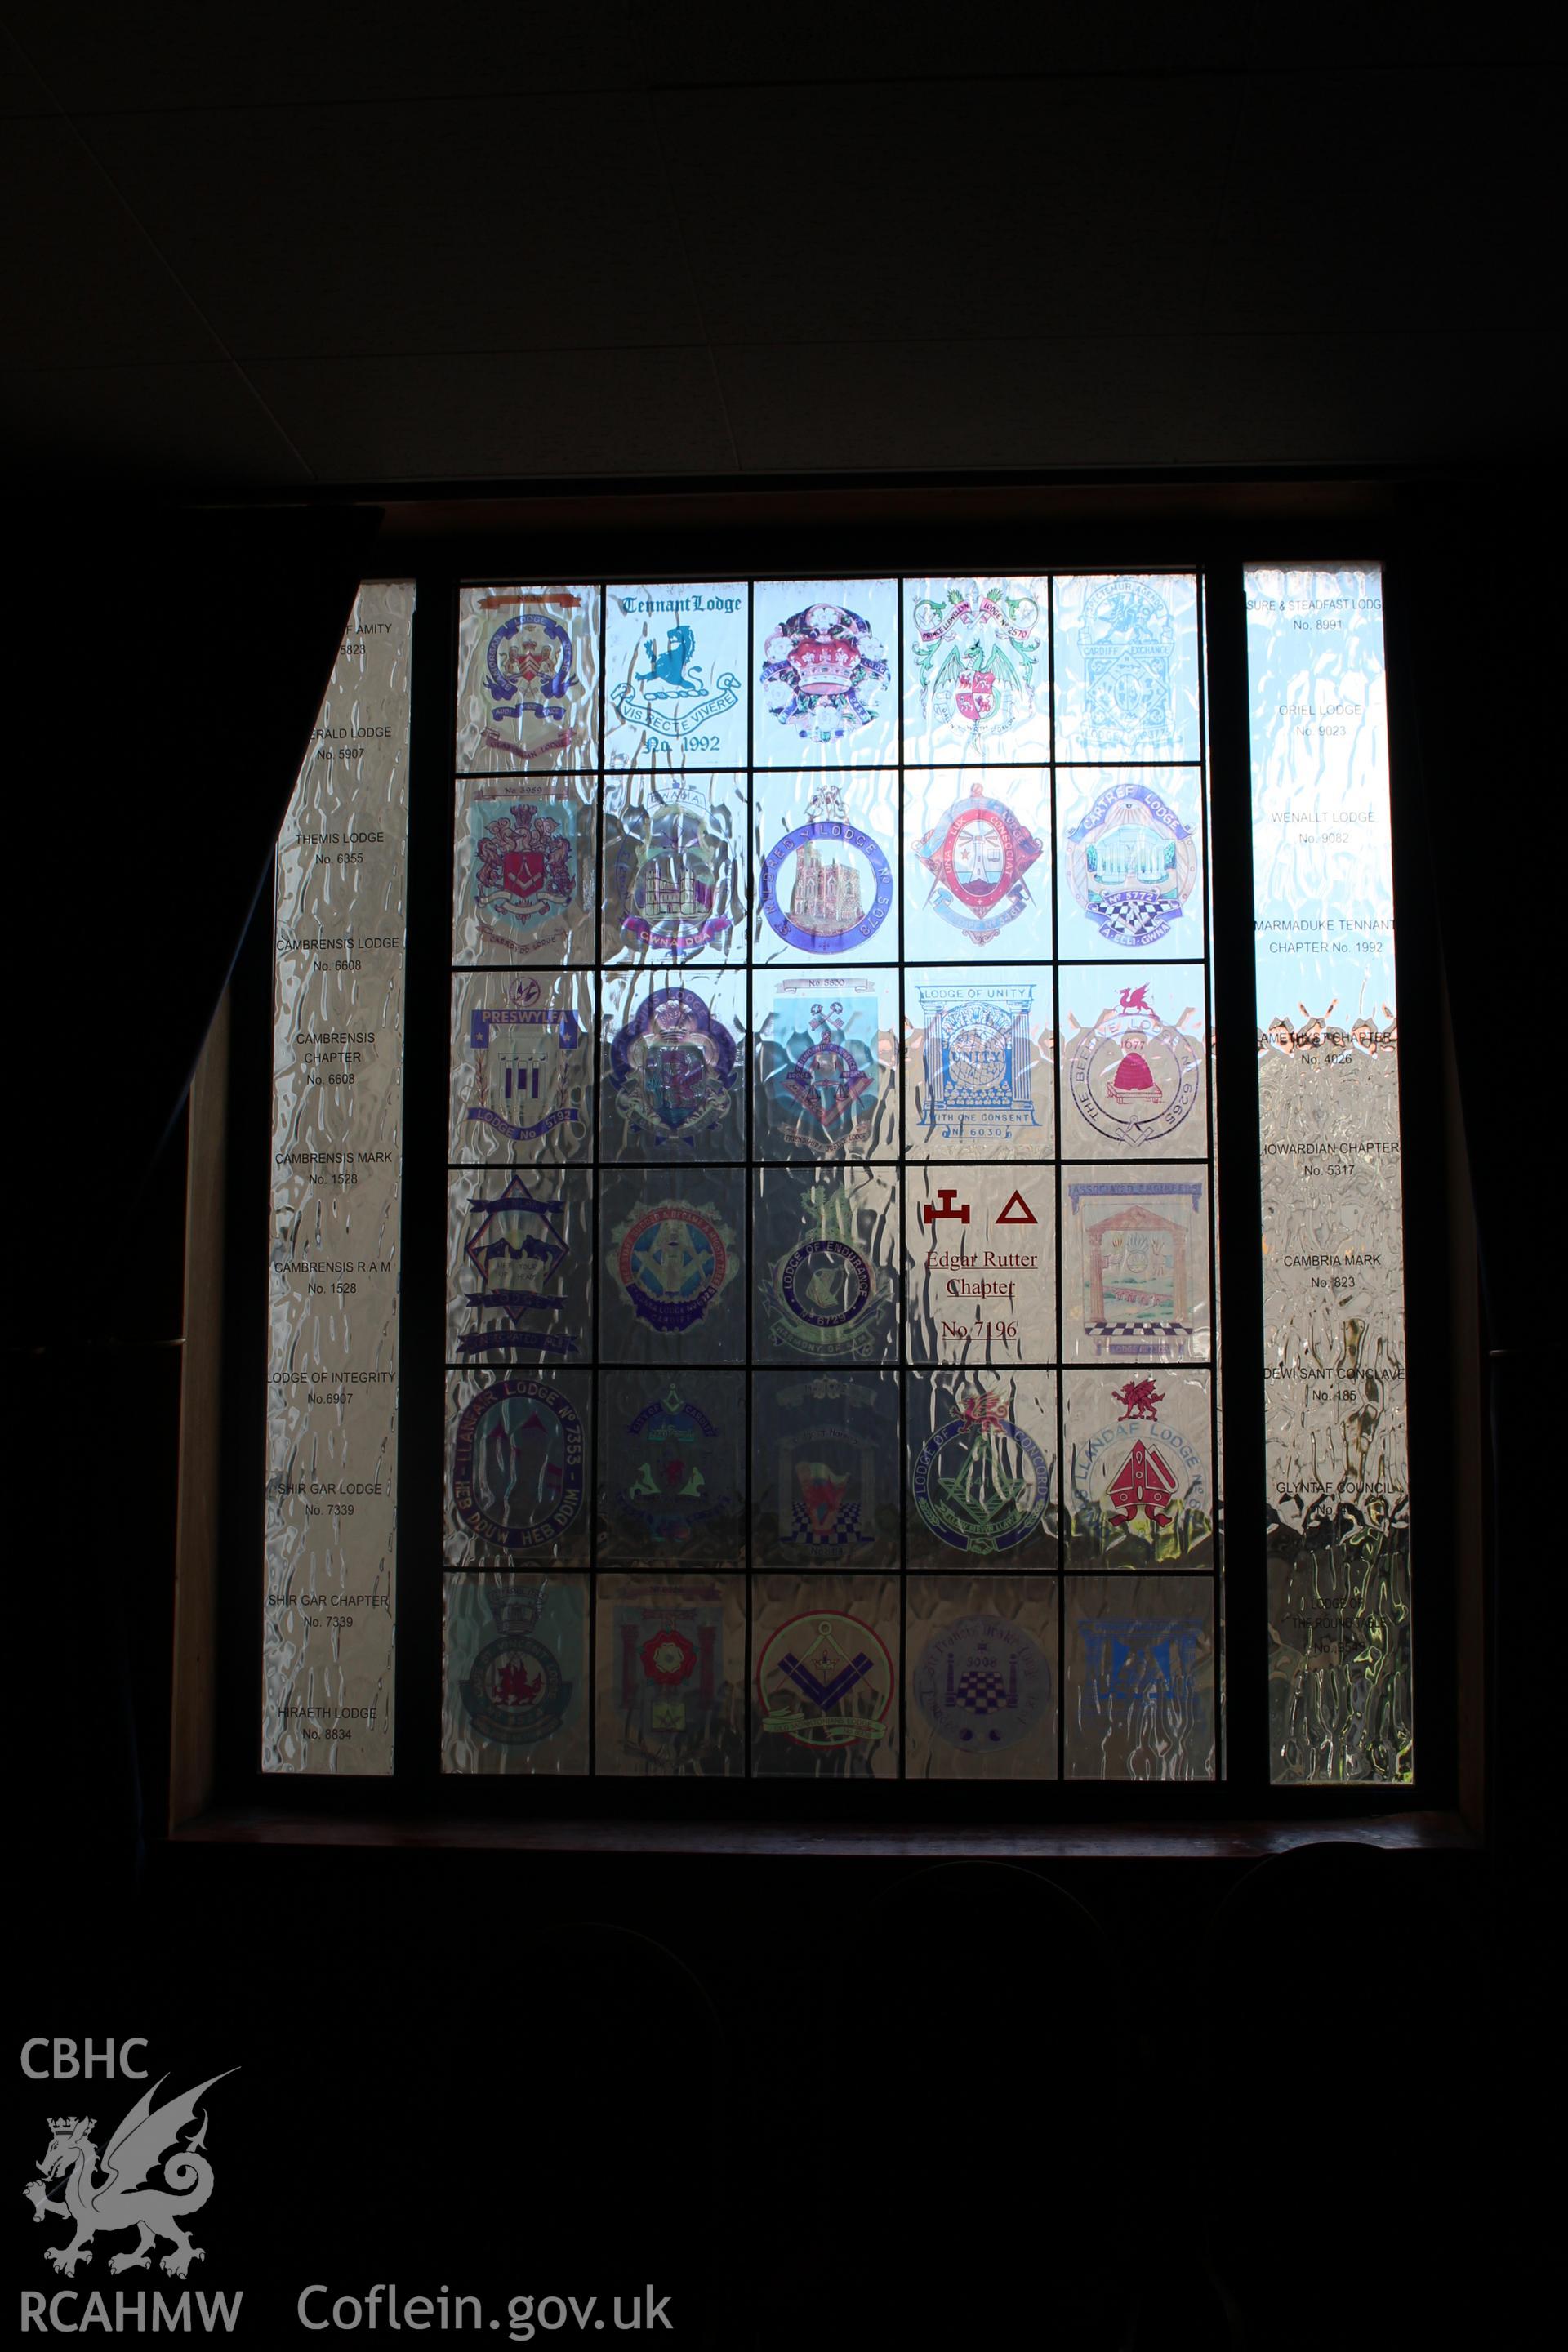 Detailed view of former stained glass window at United Free Methodist Church, now a Masonic Temple, in Cardiff. Photograph taken during survey conducted by Sue Fielding of the RCAHMW, 11th March 2019.